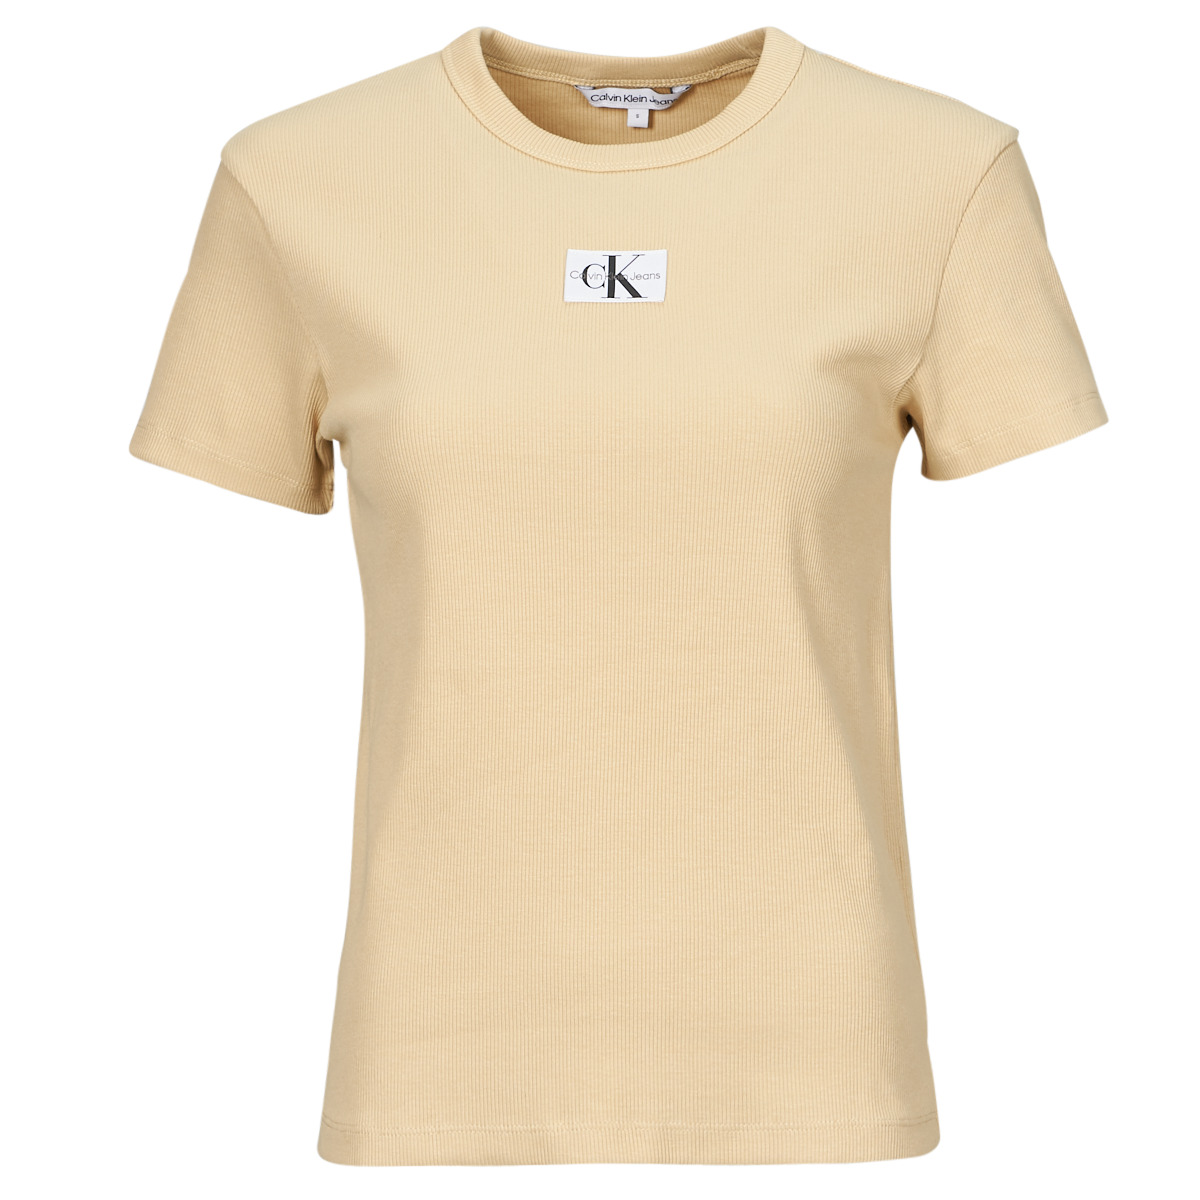 Women | Klein TEE Calvin short-sleeved Fast Jeans Beige Clothing RIB € ! Europe delivery - LABEL t-shirts Spartoo REGULAR - 44,00 WOVEN